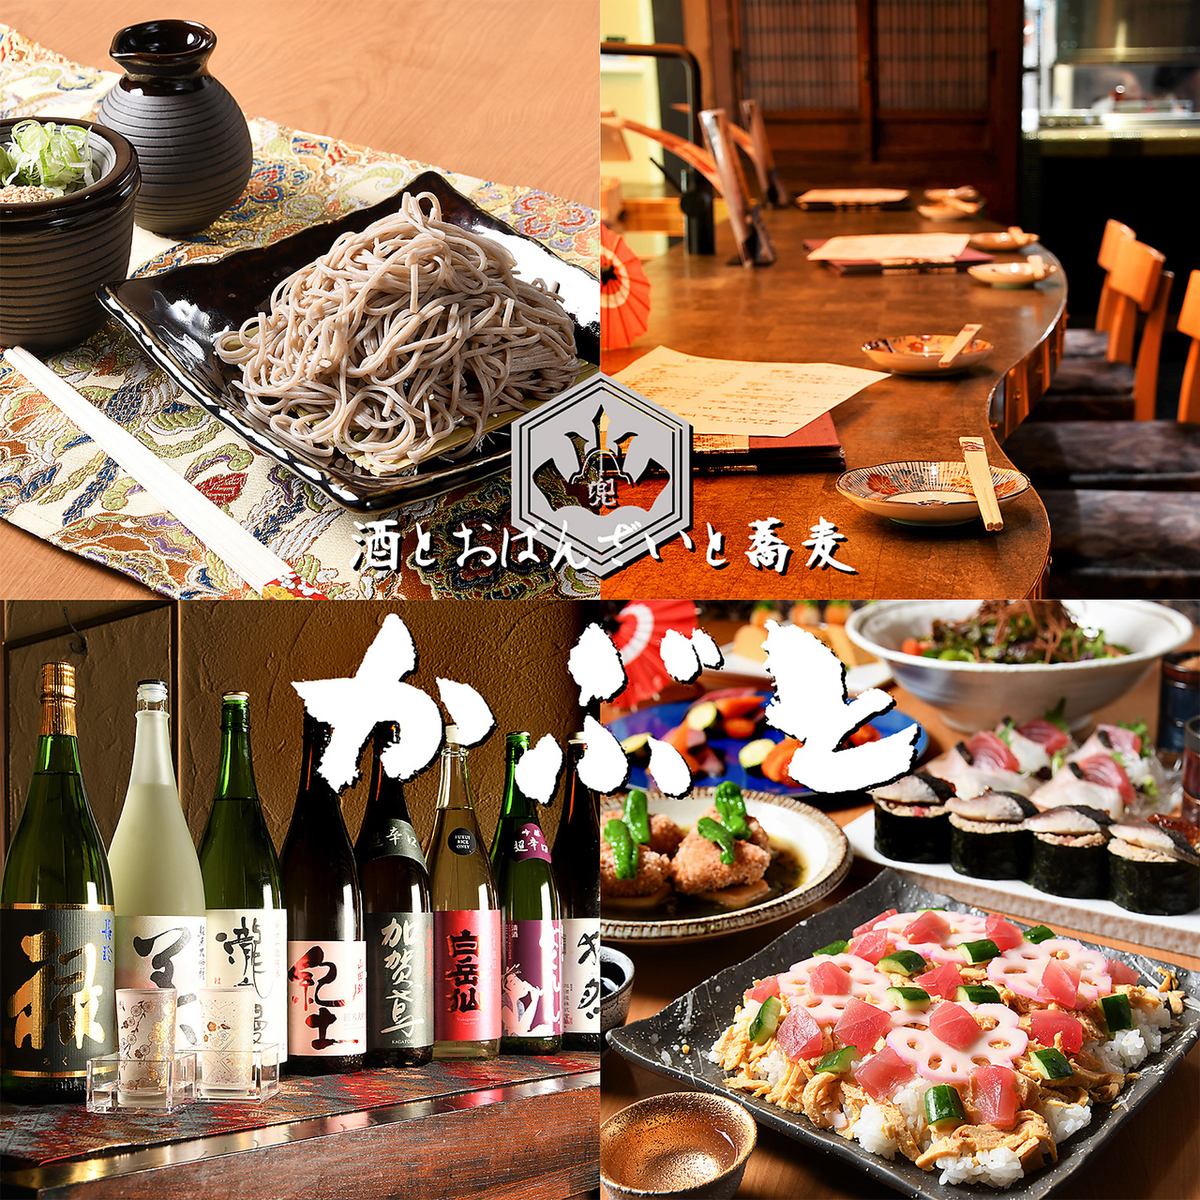 A relaxing space for a relaxing moment...Enjoy carefully selected sake, side dishes, obanzai, and soba noodles.